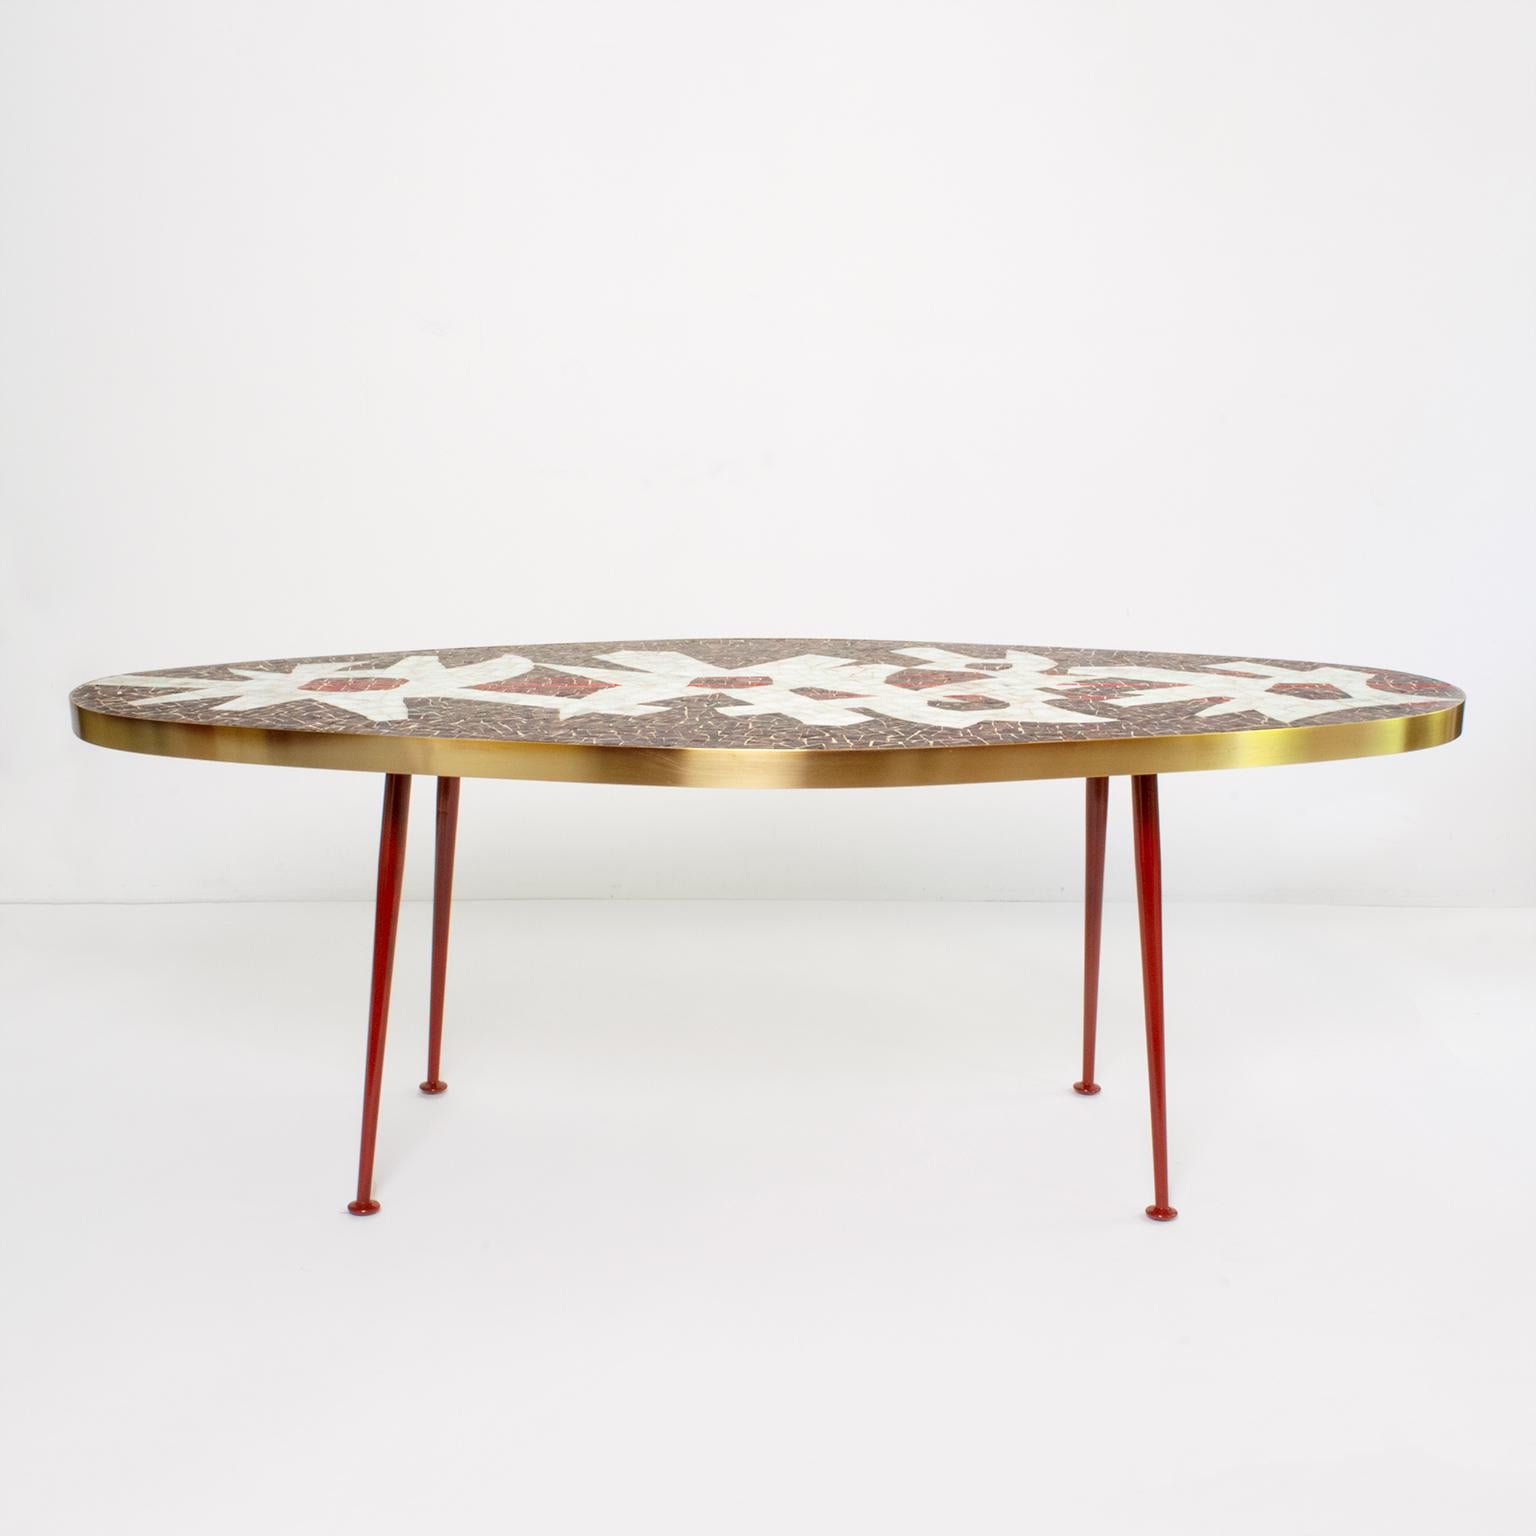 German Oval Form Midcentury Mosaic Coffee Table Brass body Designed by Berthold Muller